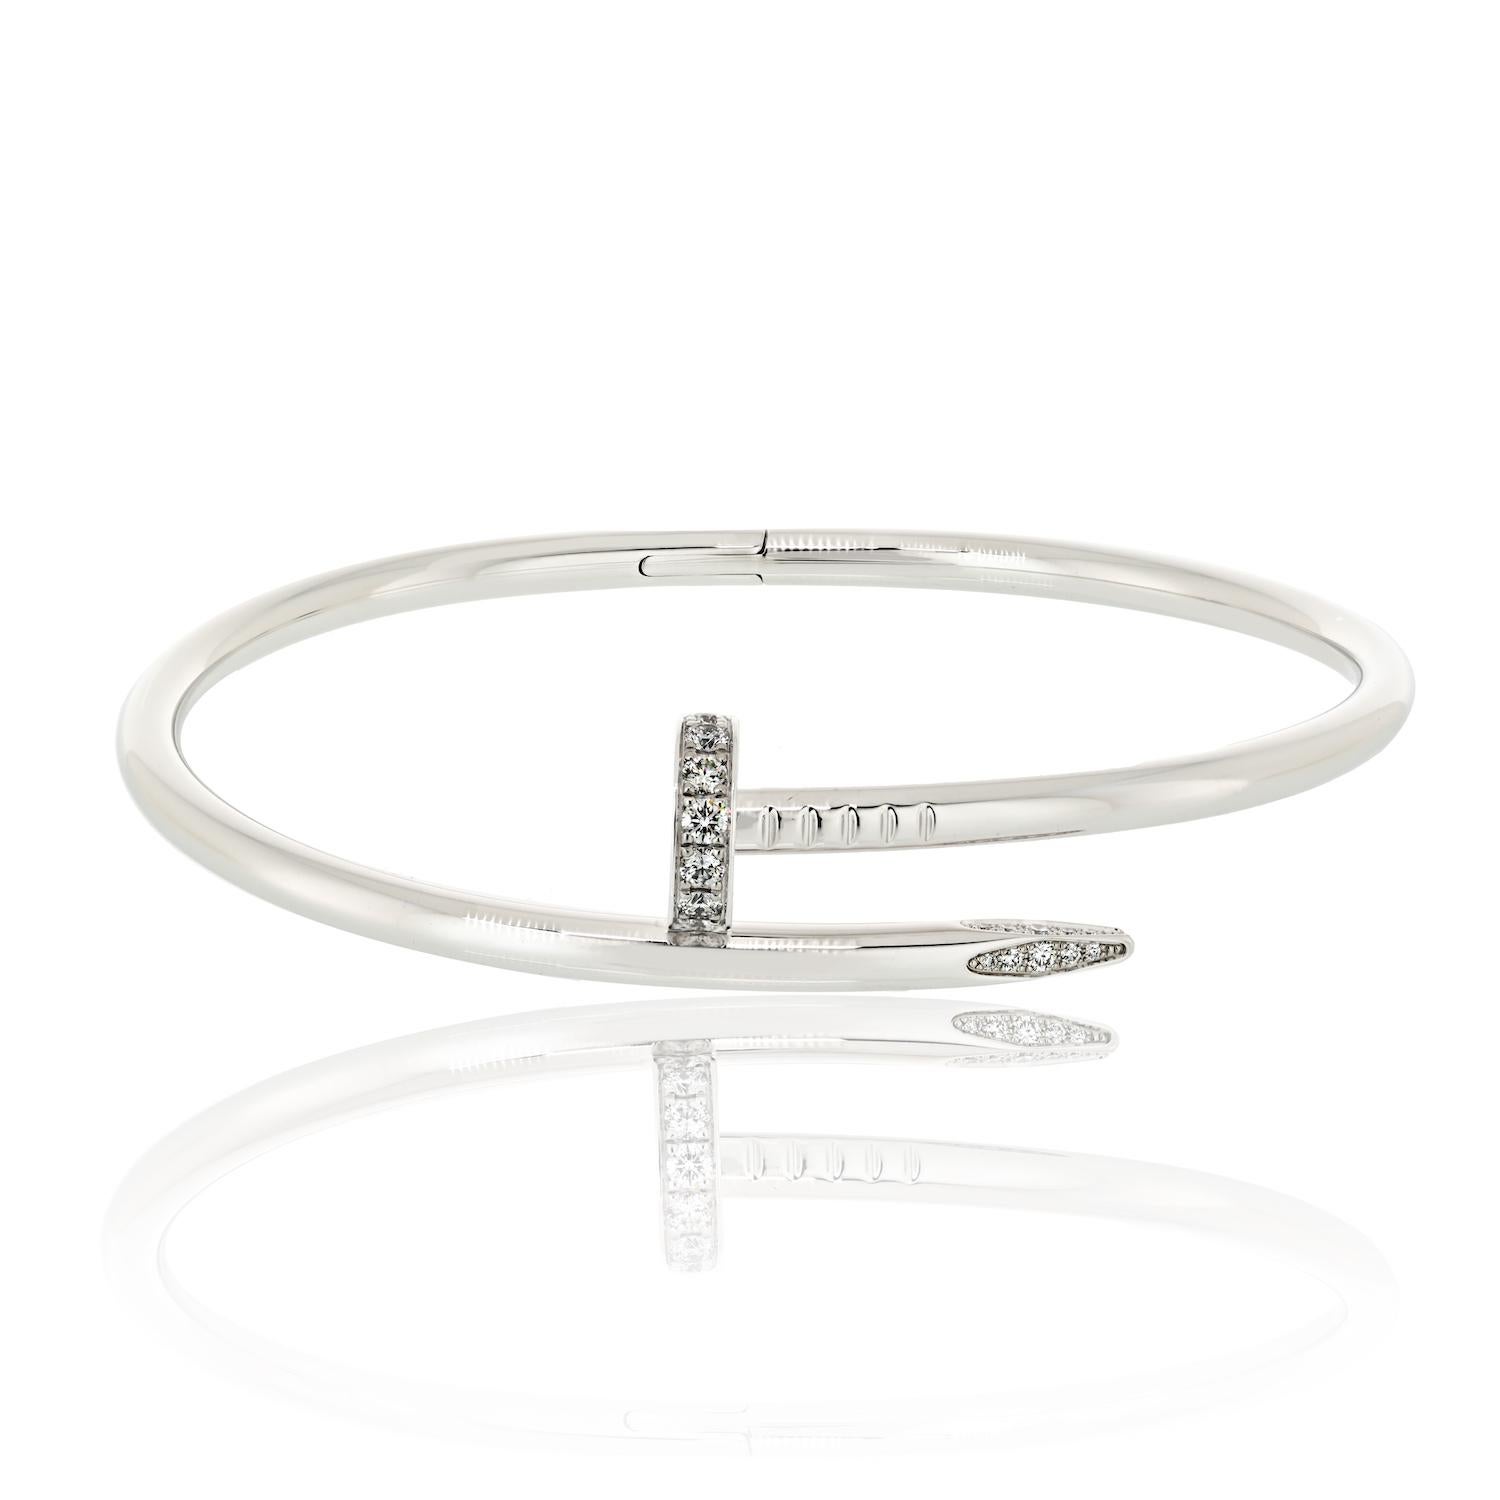 The pre-owned Juste Un Clou white gold diamond nail bracelet is a stunning piece of jewelry that is in excellent condition. This bracelet is crafted from high-quality gold and features a unique nail design that is accented with diamonds. The